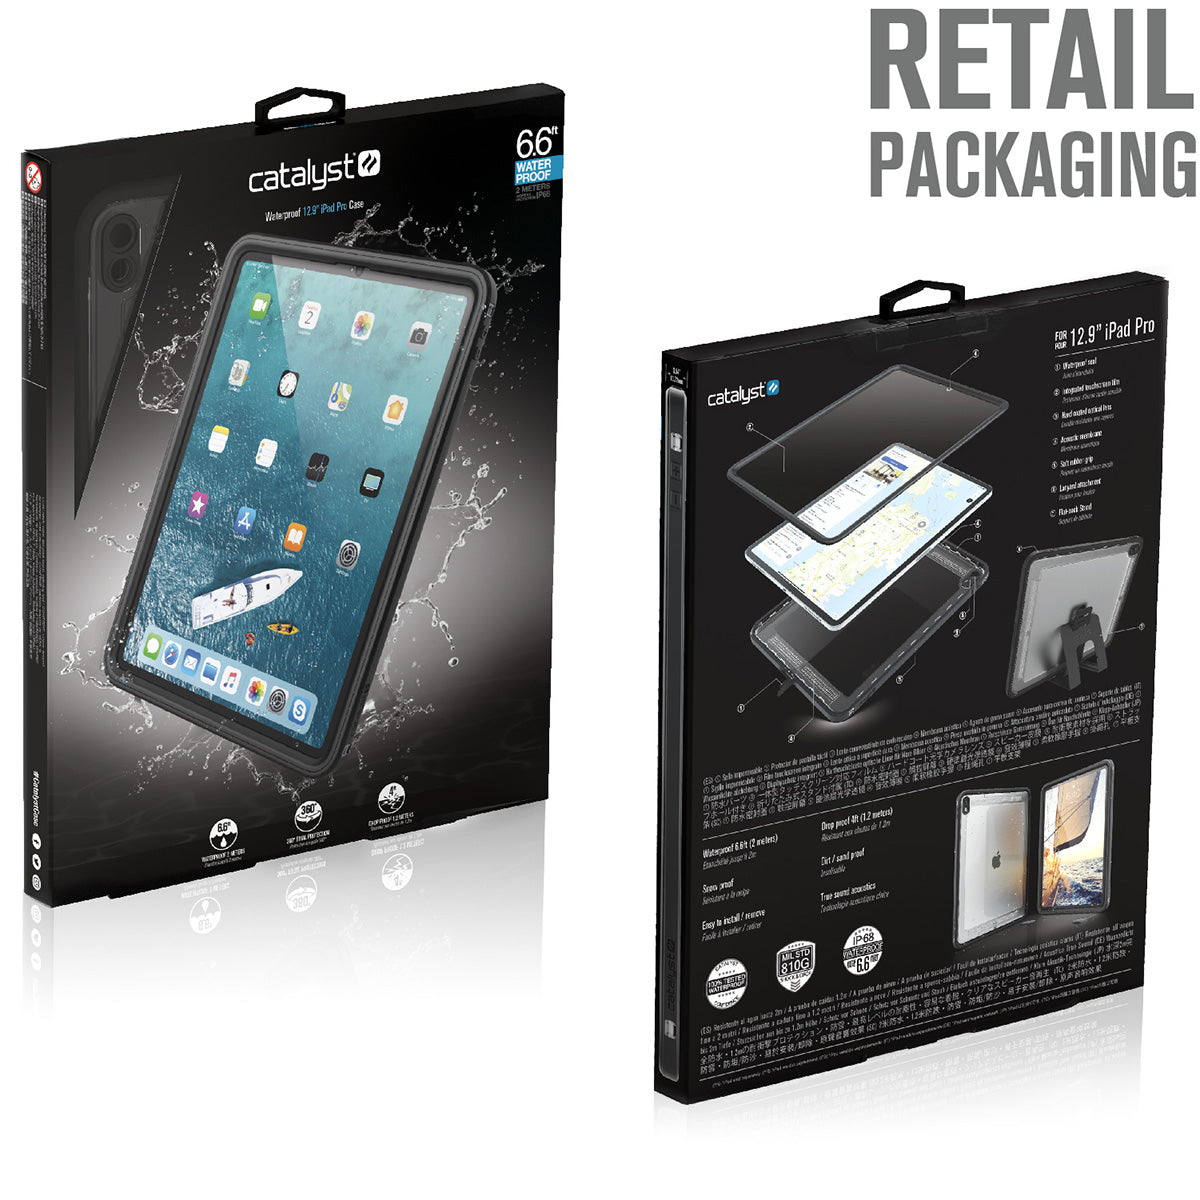 Catalyst waterproof case for ipad pro gen 3 12.9in black front and back packaging Text reads Retail packaging